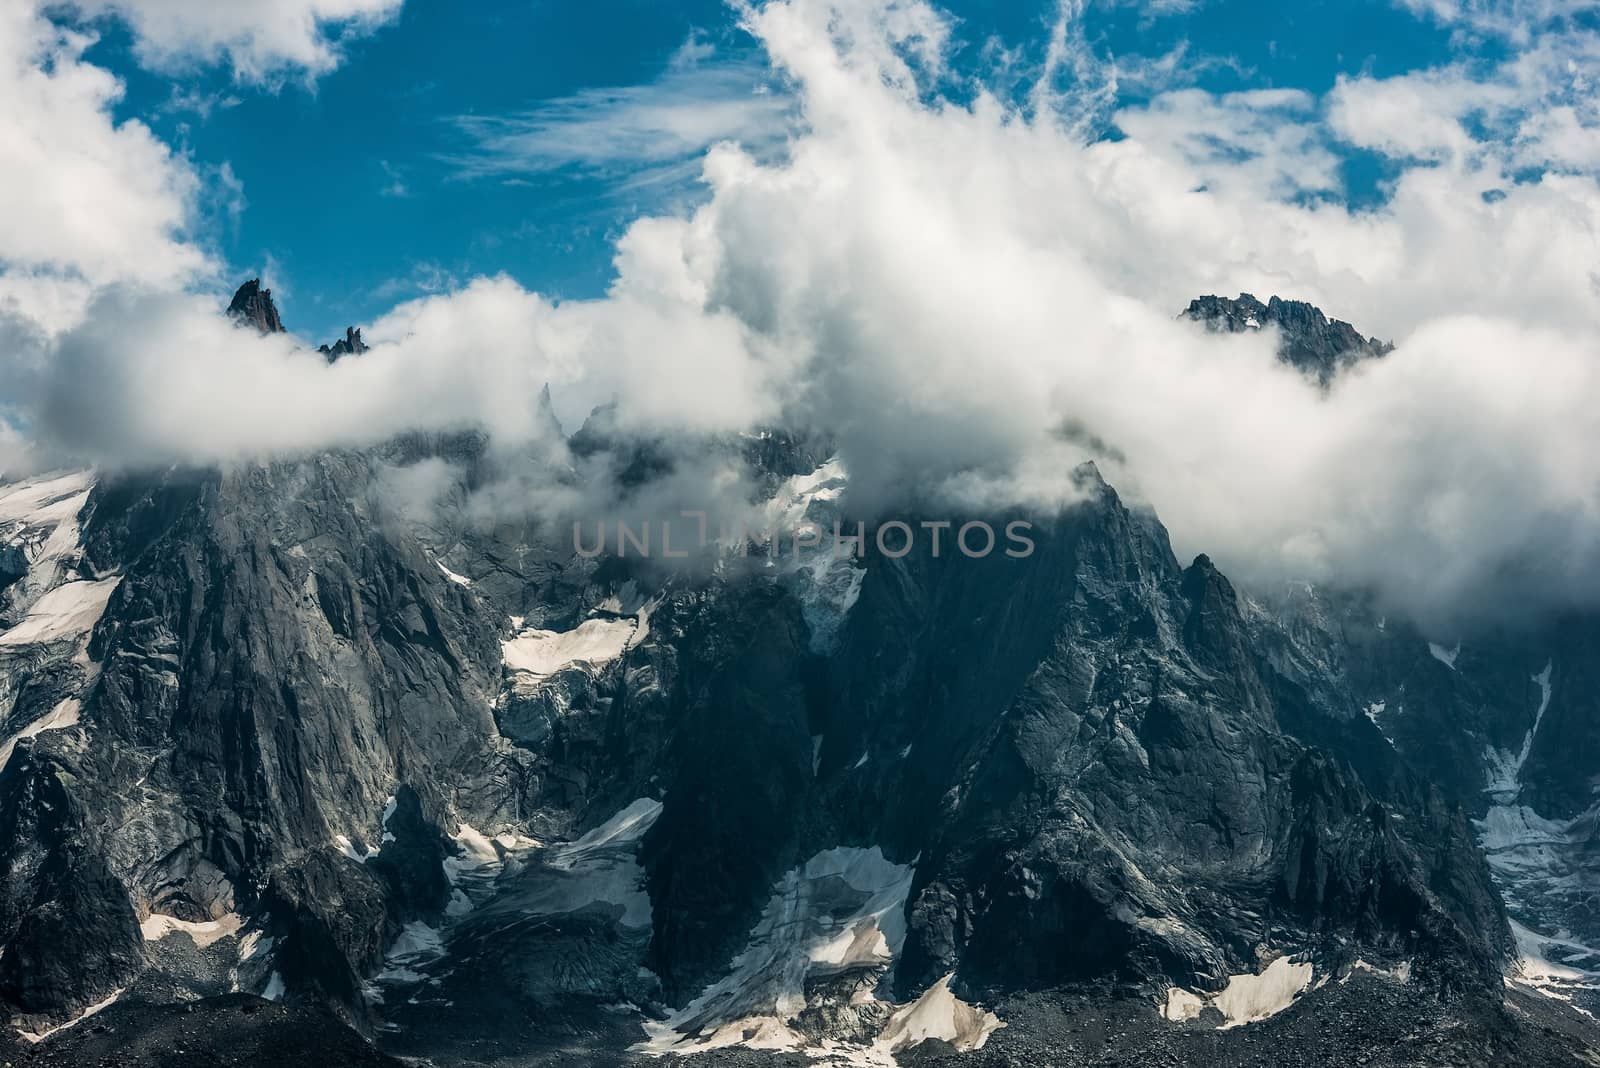 Clloudy Mont Blanc Massif by welcomia